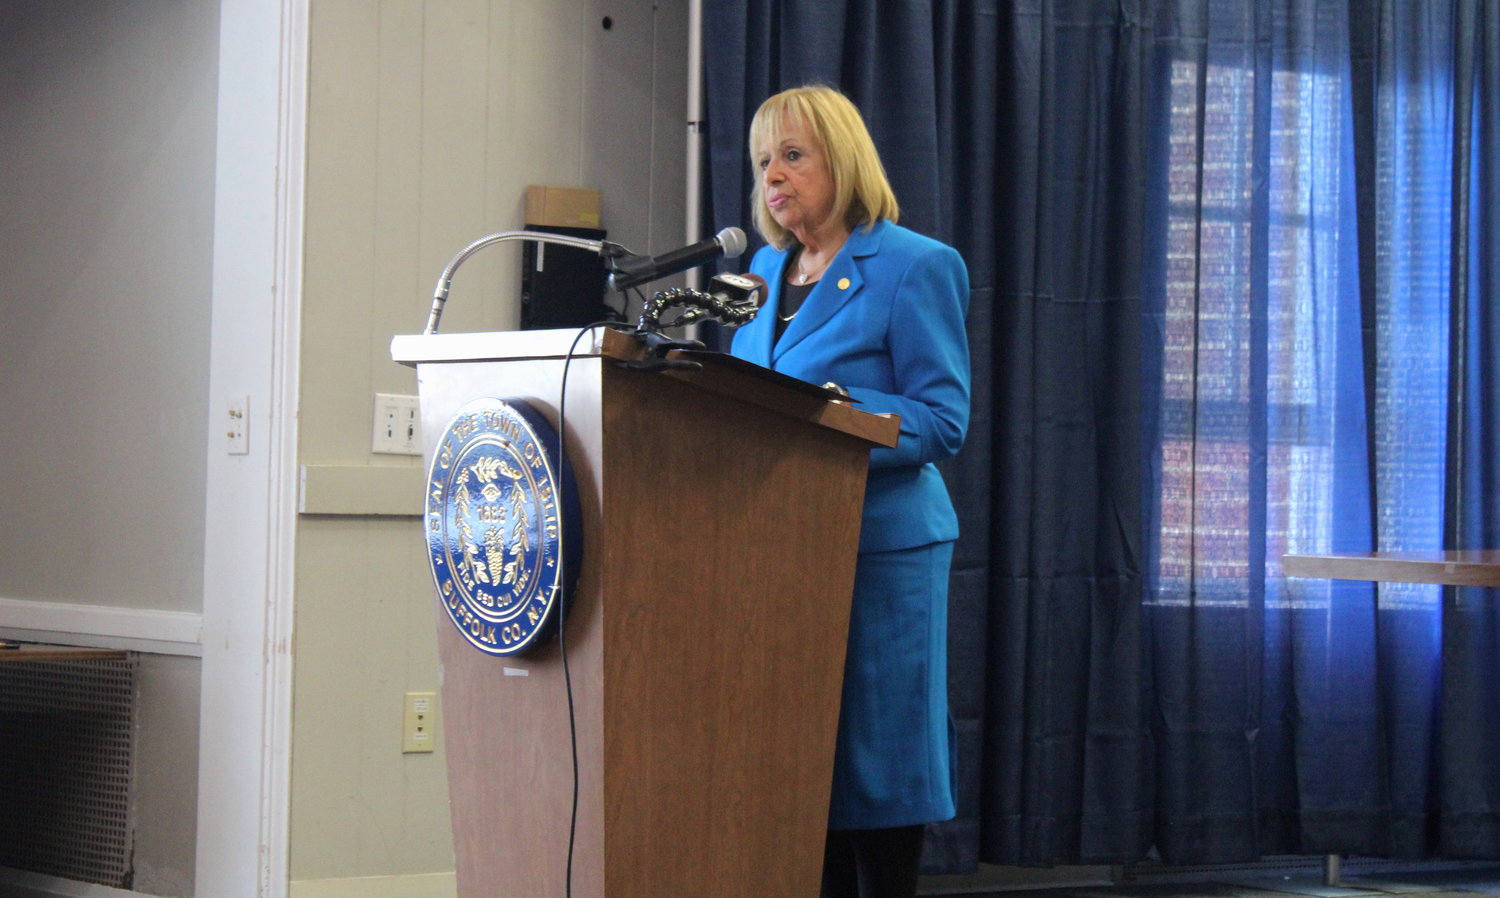 Islip Town supervisor Angie Carpenter gives her State of the Town address at Islip Town Hall on April 21.